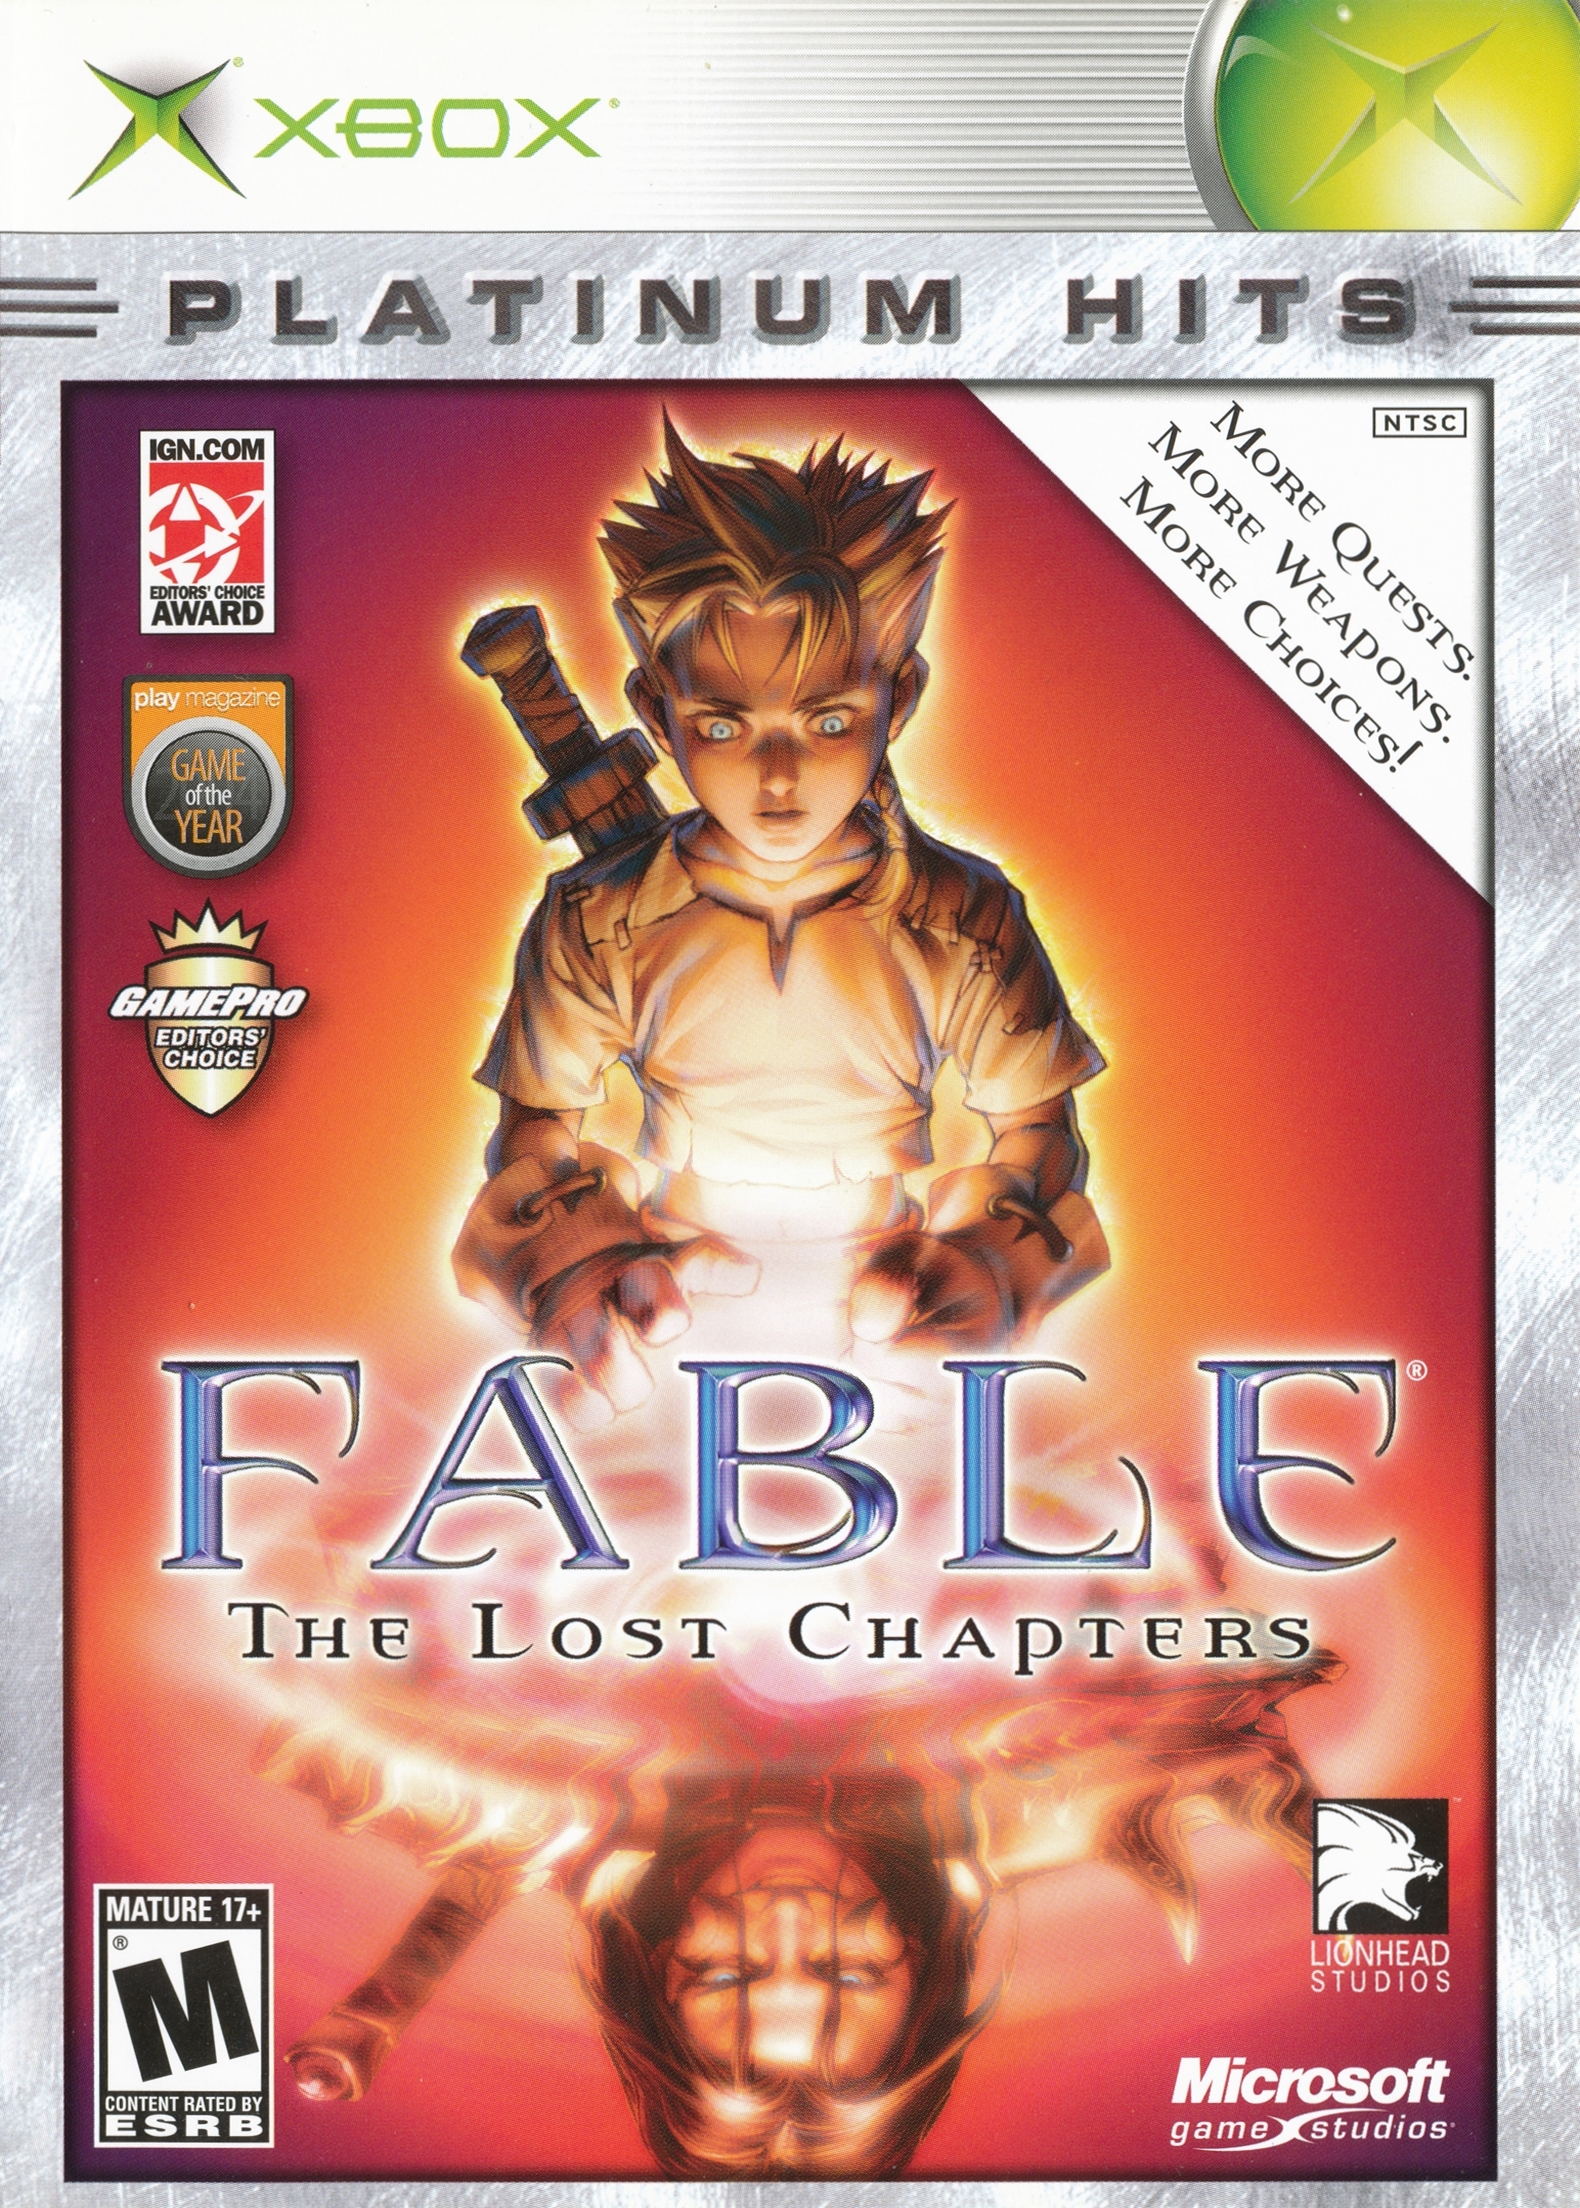 fable 2 pc game system requirements